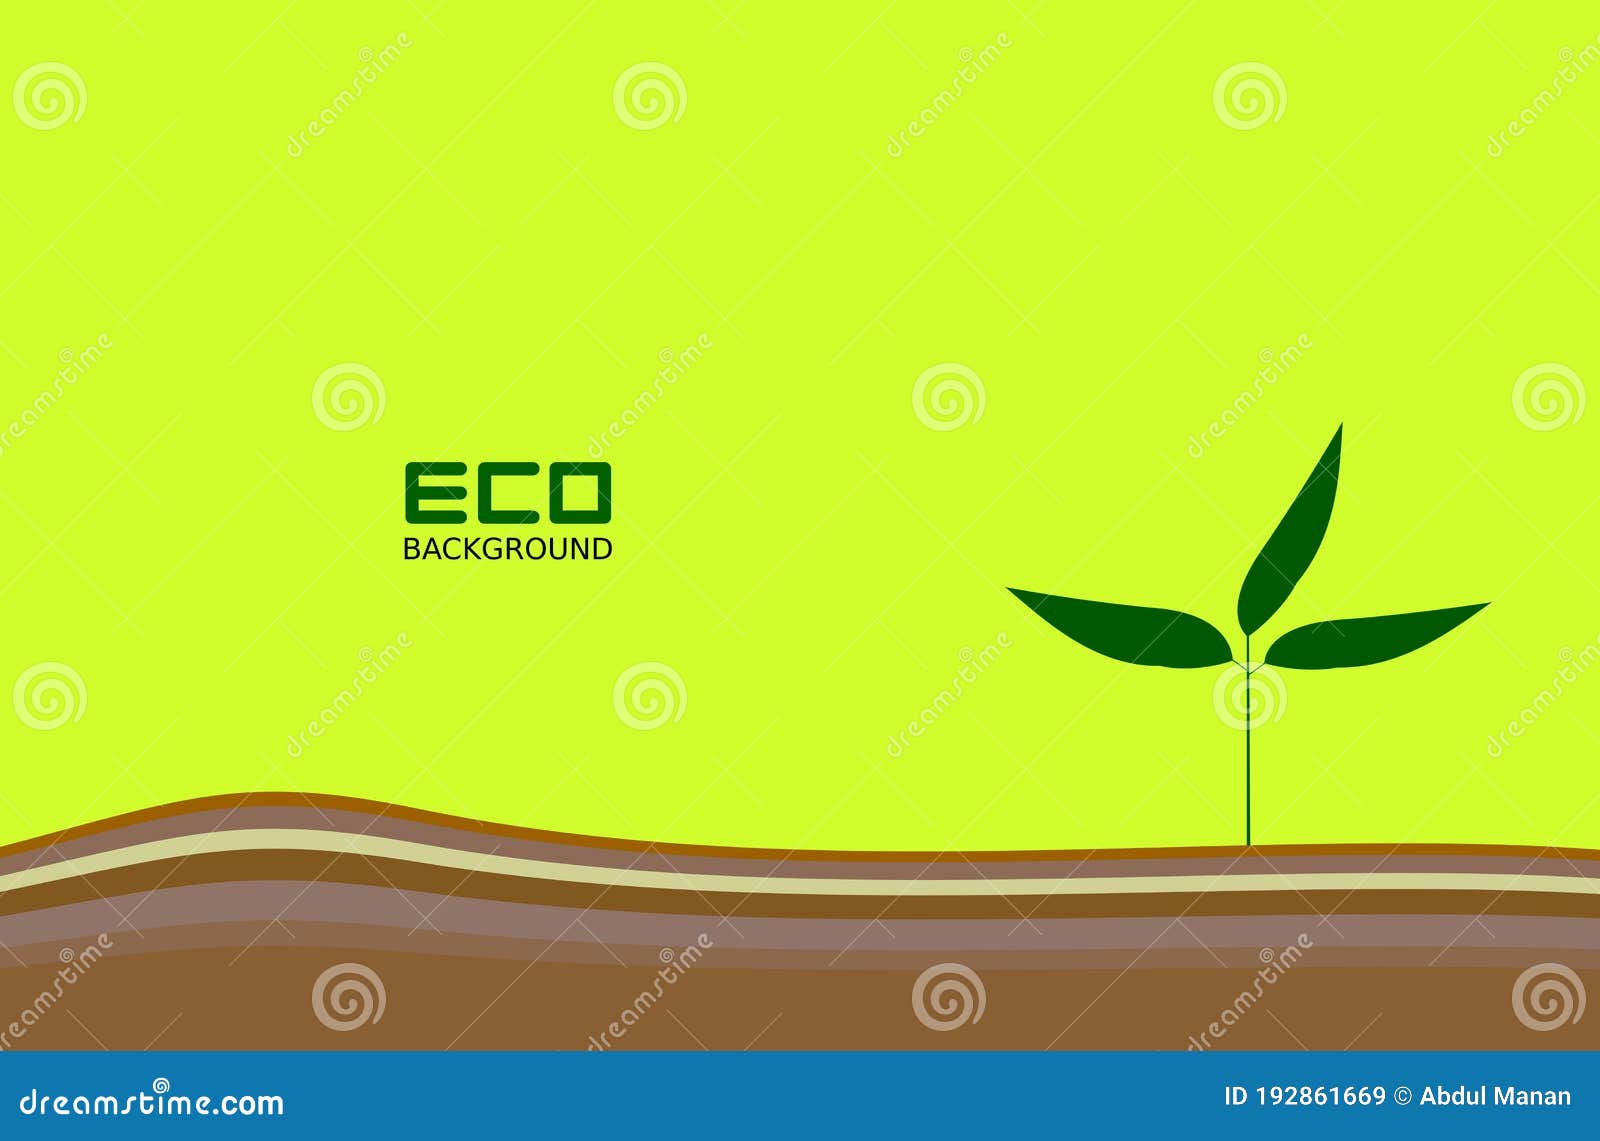 Green Eco Friendly Backgrounds with Leaf Patterns Stock Vector -  Illustration of card, line: 192861669